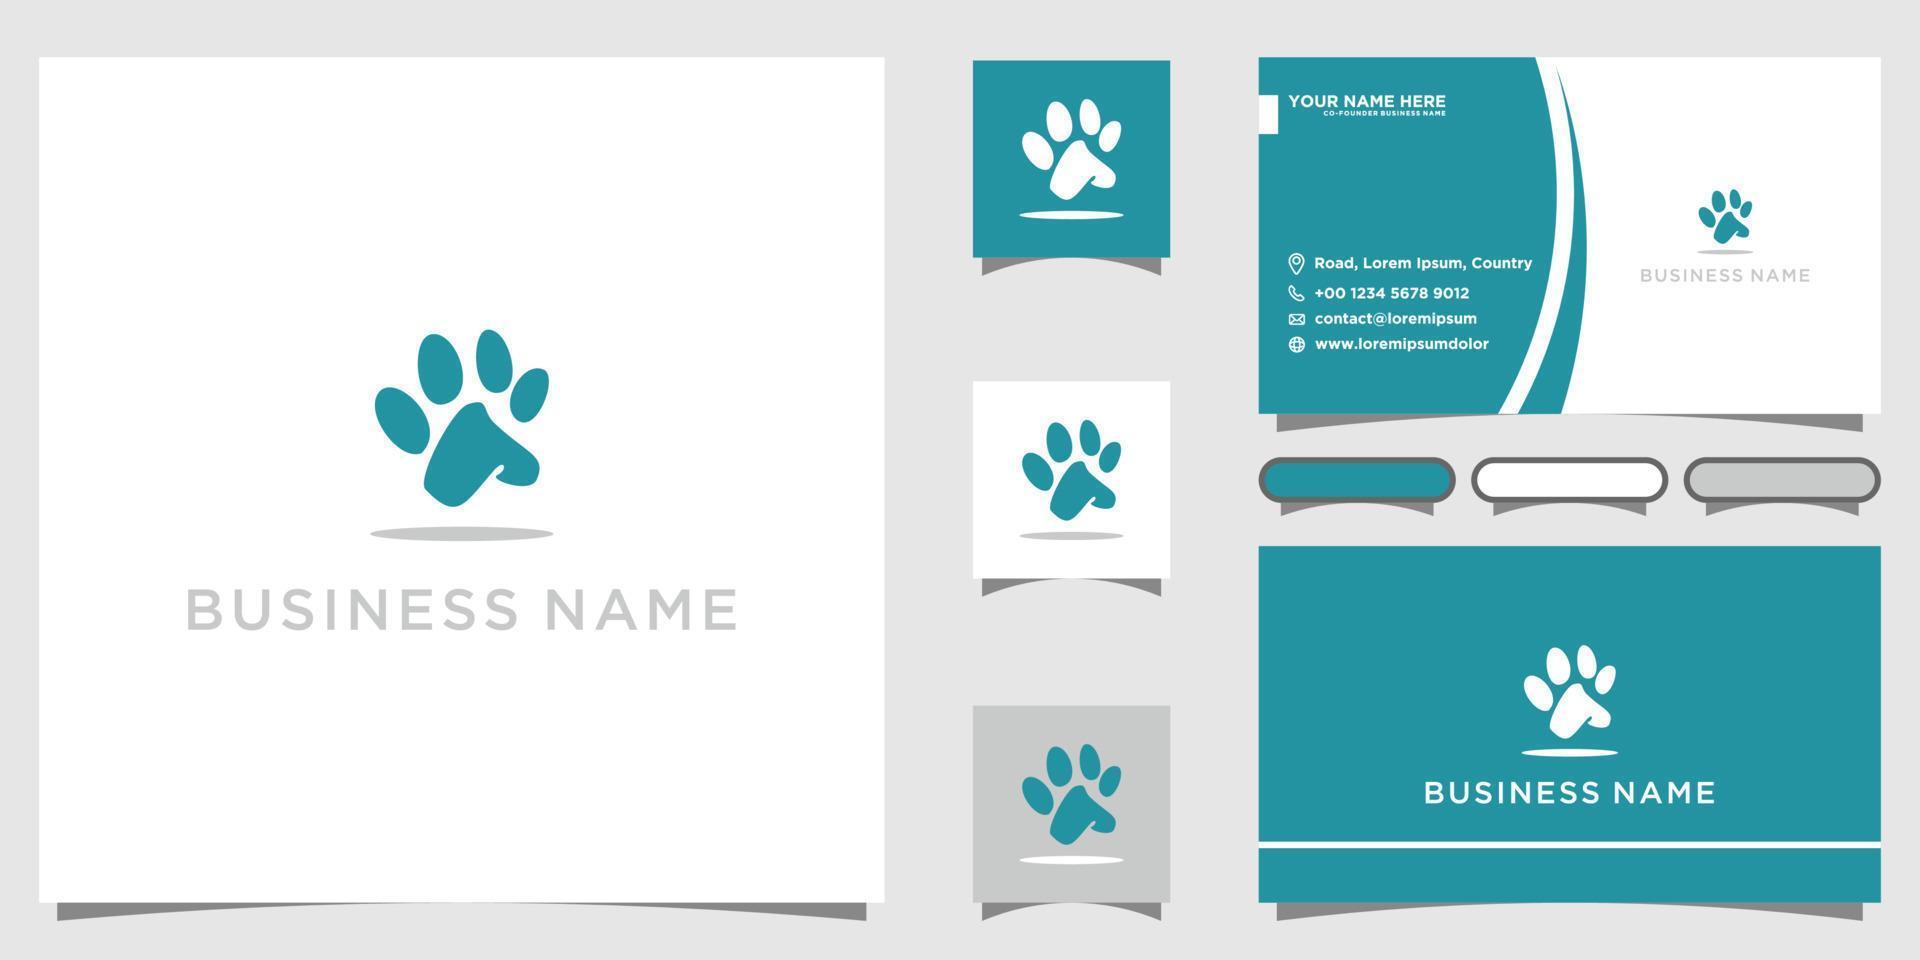 Pet clinic logo - vector illustration, suitable for your design need, logo, illustration, animation, etc.